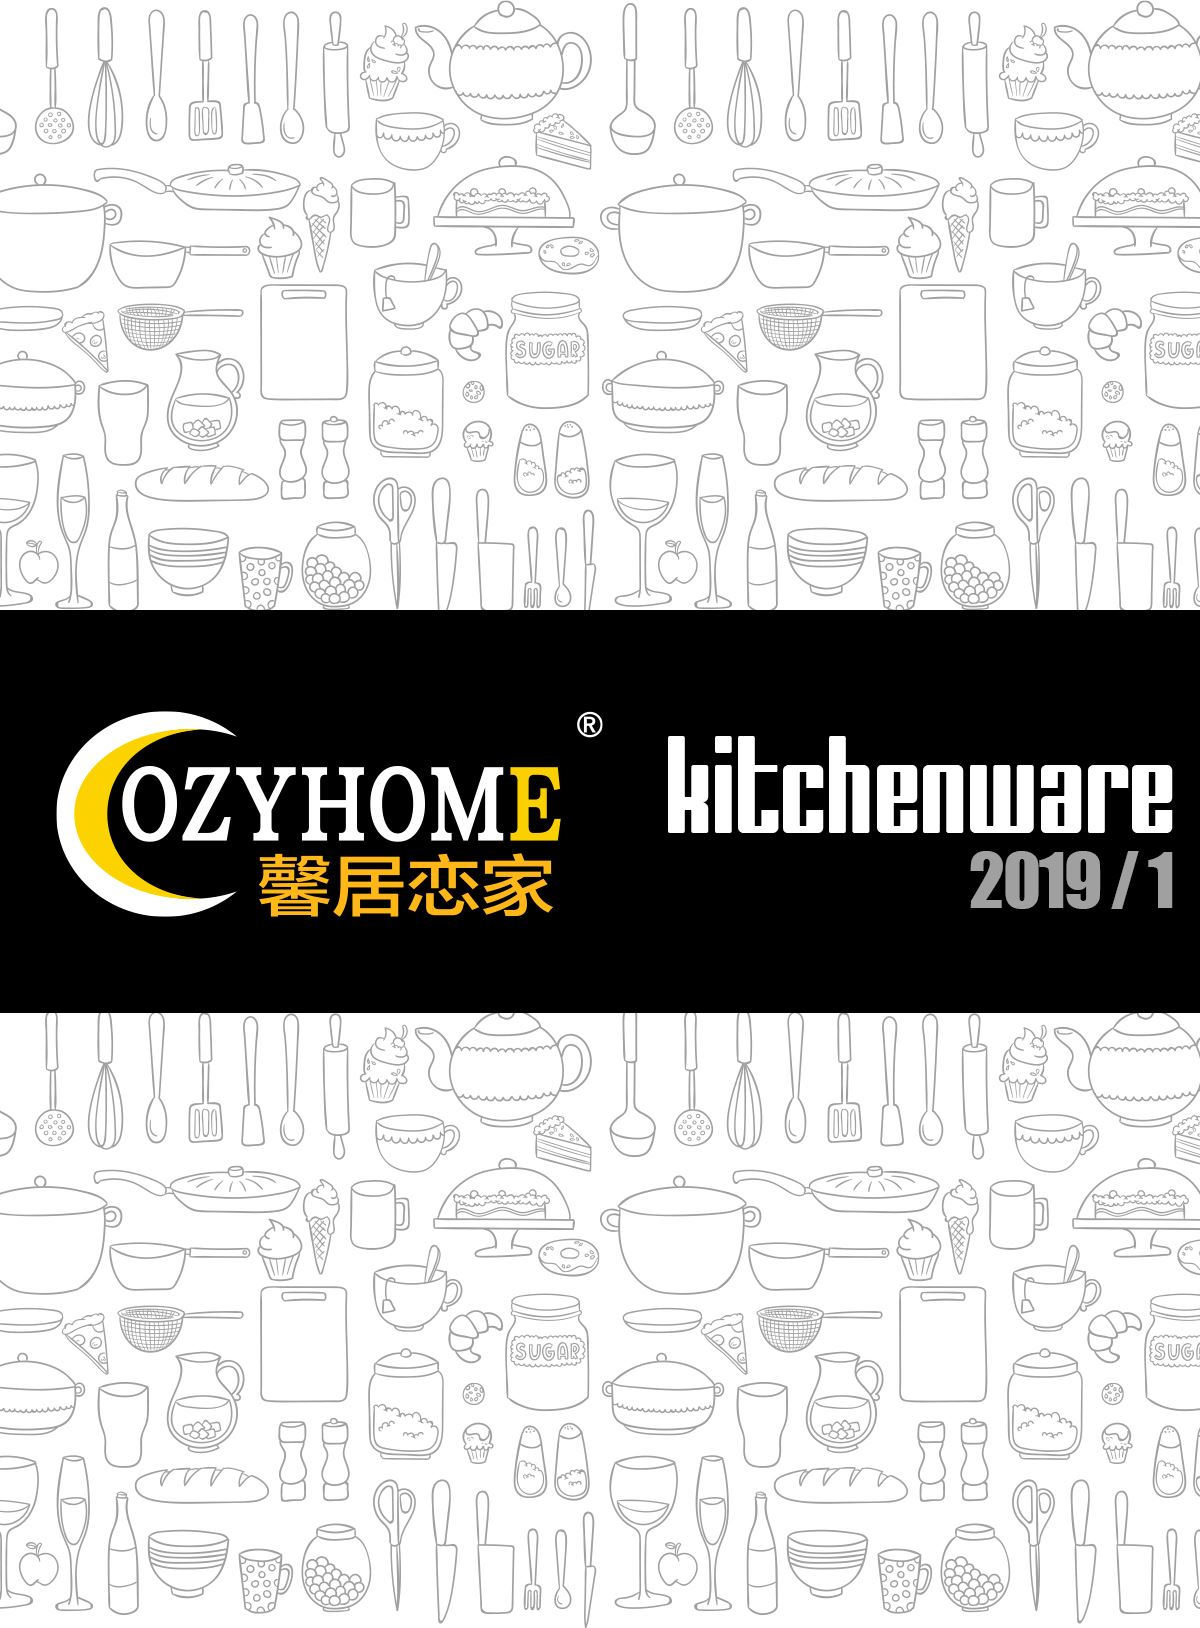 CozyHome Kitchenware 2019 Pages: 01